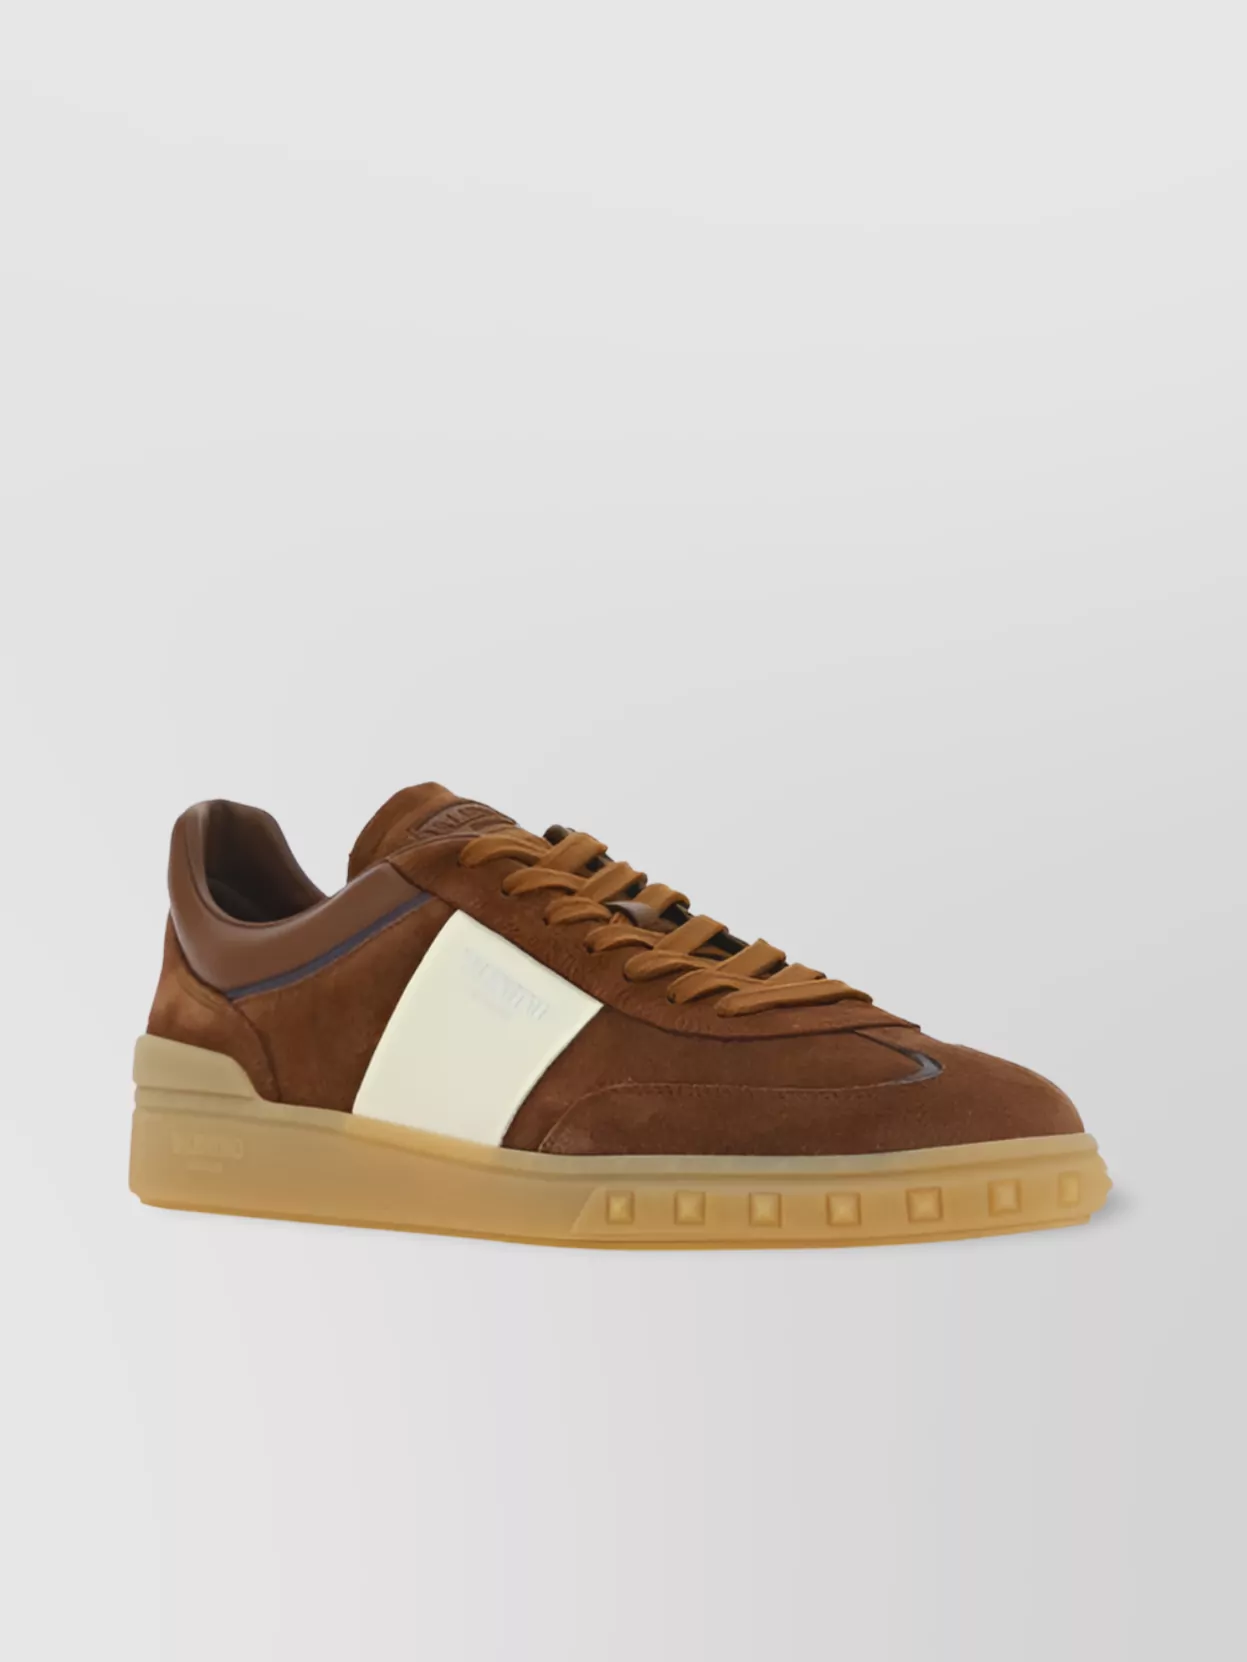 Valentino Garavani Highline Suede Leather Sneakers With Rubber Sole In Brown